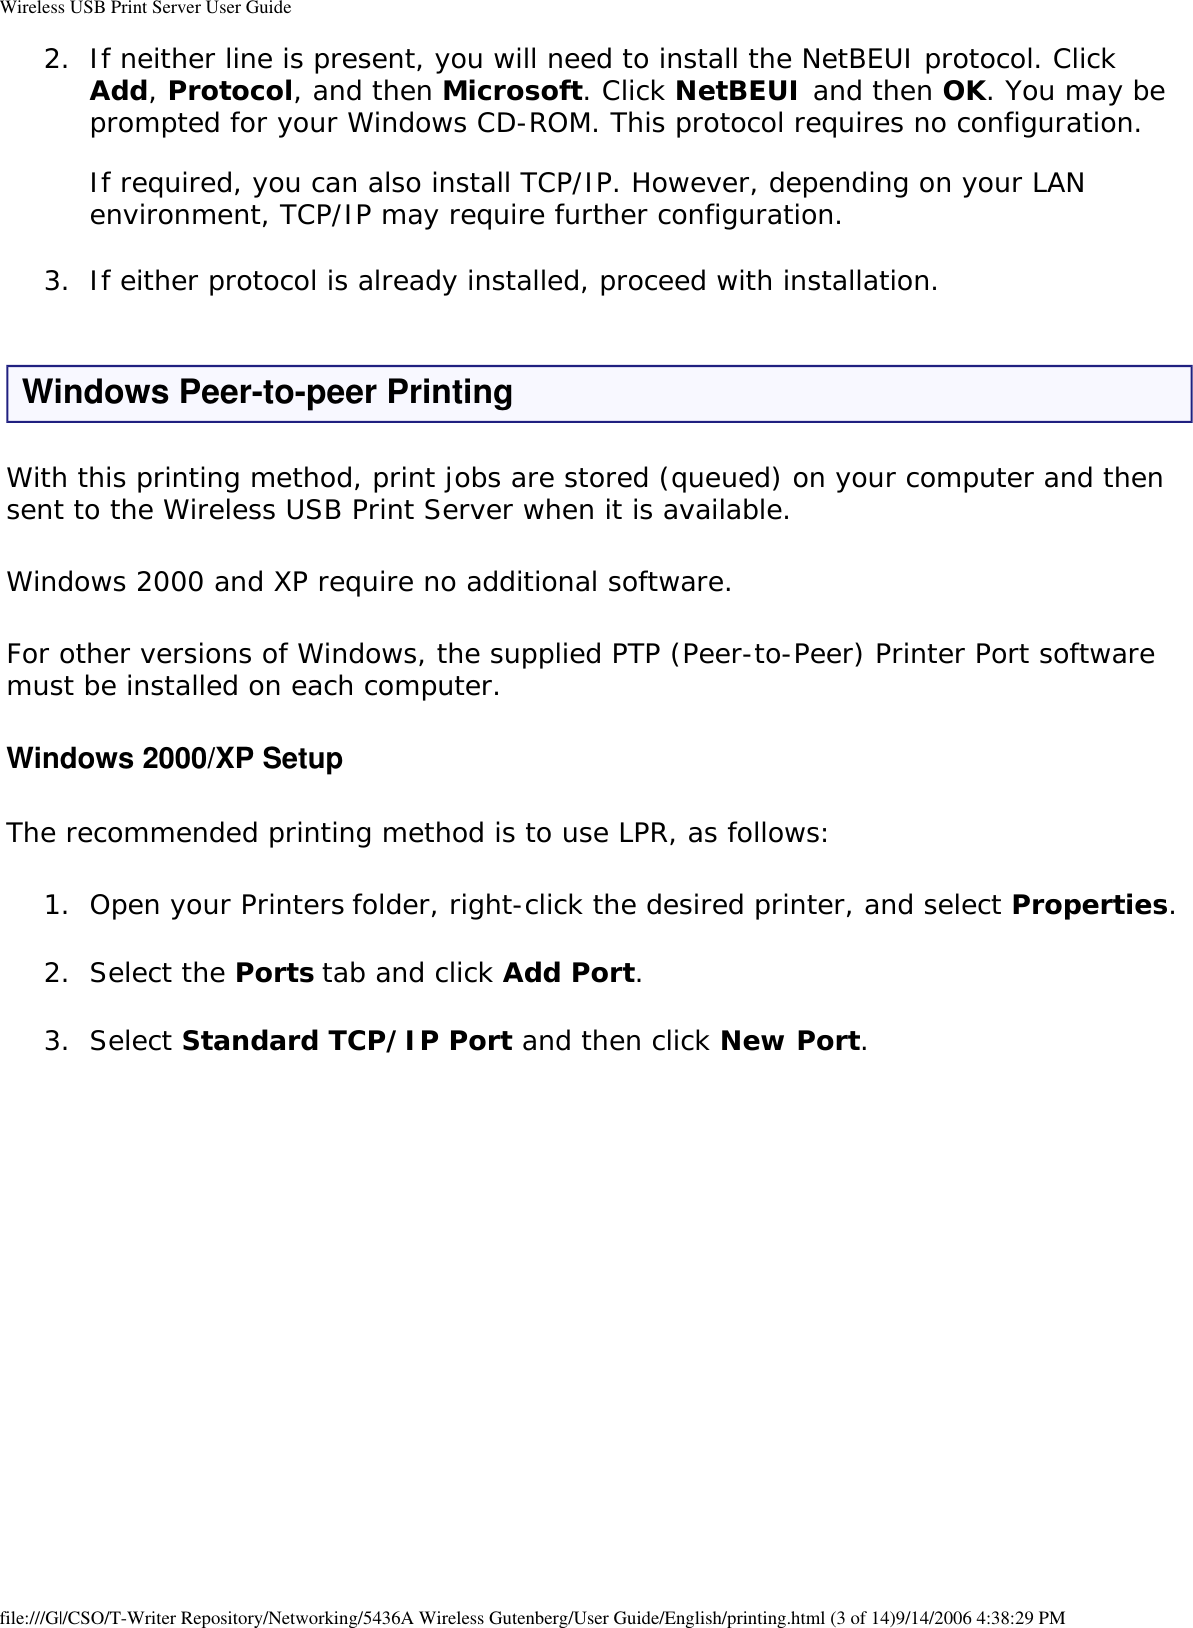 Wireless USB Print Server User Guide2.  If neither line is present, you will need to install the NetBEUI protocol. Click Add, Protocol, and then Microsoft. Click NetBEUI and then OK. You may be prompted for your Windows CD-ROM. This protocol requires no configuration.  If required, you can also install TCP/IP. However, depending on your LAN environment, TCP/IP may require further configuration. 3.  If either protocol is already installed, proceed with installation. Windows Peer-to-peer PrintingWith this printing method, print jobs are stored (queued) on your computer and then sent to the Wireless USB Print Server when it is available.Windows 2000 and XP require no additional software.For other versions of Windows, the supplied PTP (Peer-to-Peer) Printer Port software must be installed on each computer.Windows 2000/XP SetupThe recommended printing method is to use LPR, as follows:1.  Open your Printers folder, right-click the desired printer, and select Properties. 2.  Select the Ports tab and click Add Port. 3.  Select Standard TCP/IP Port and then click New Port.   file:///G|/CSO/T-Writer Repository/Networking/5436A Wireless Gutenberg/User Guide/English/printing.html (3 of 14)9/14/2006 4:38:29 PM